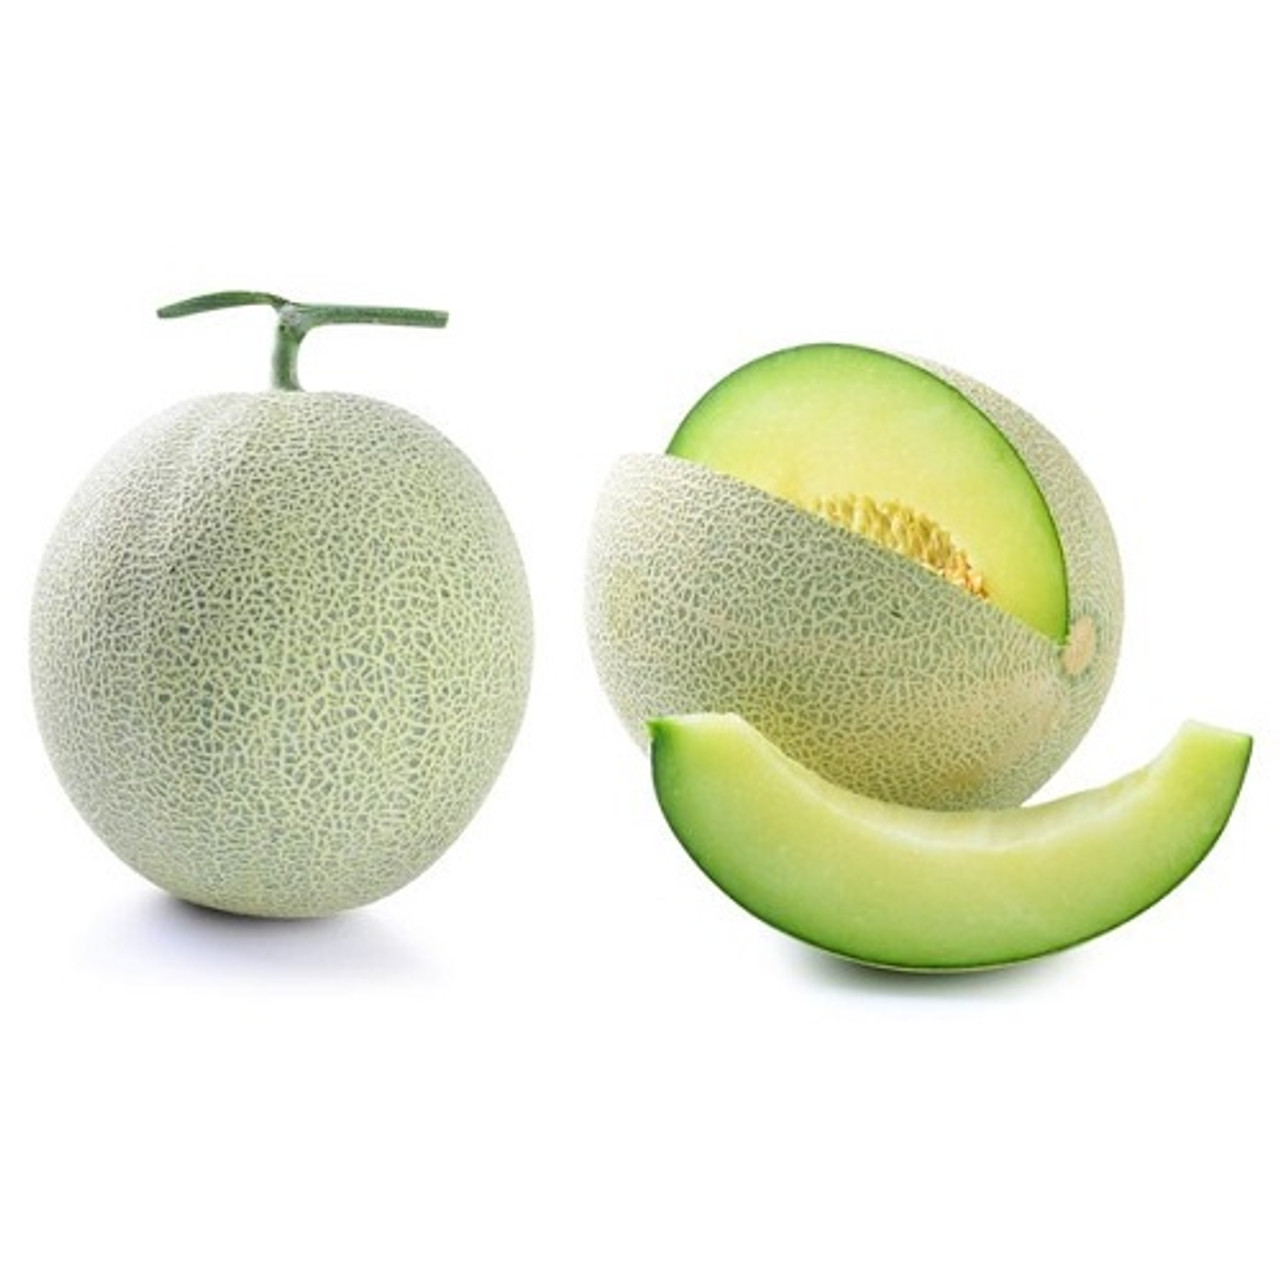 Shop Melon, Honey Dew Green and other Seeds at Harvesting History